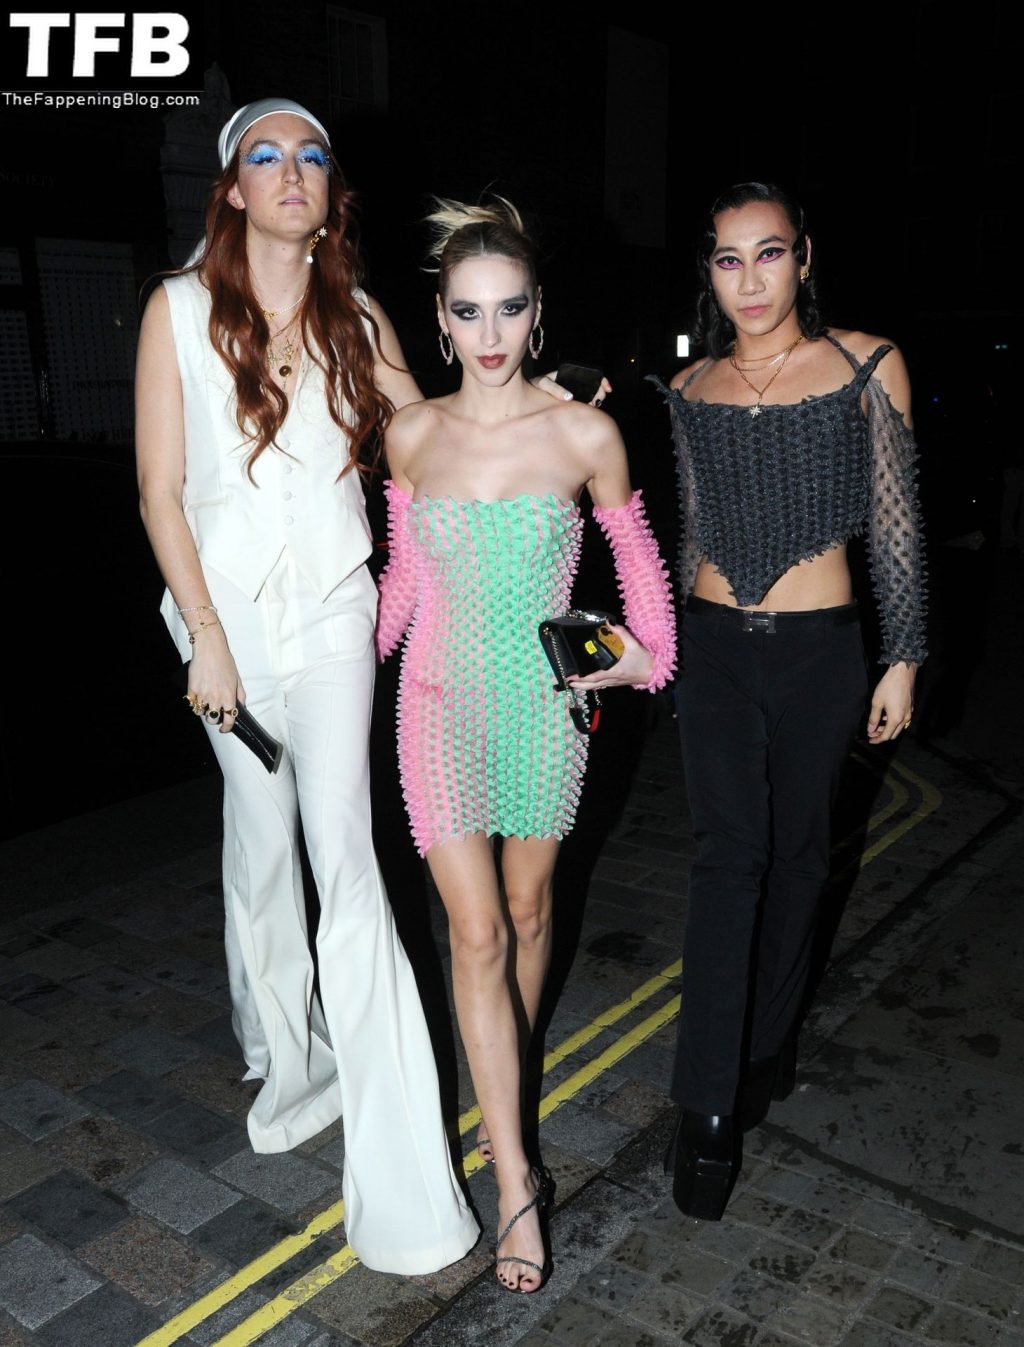 Maxim Magnus is Seen Attending The Fashion Awards 2021 Afterparty in London (6 Photos)